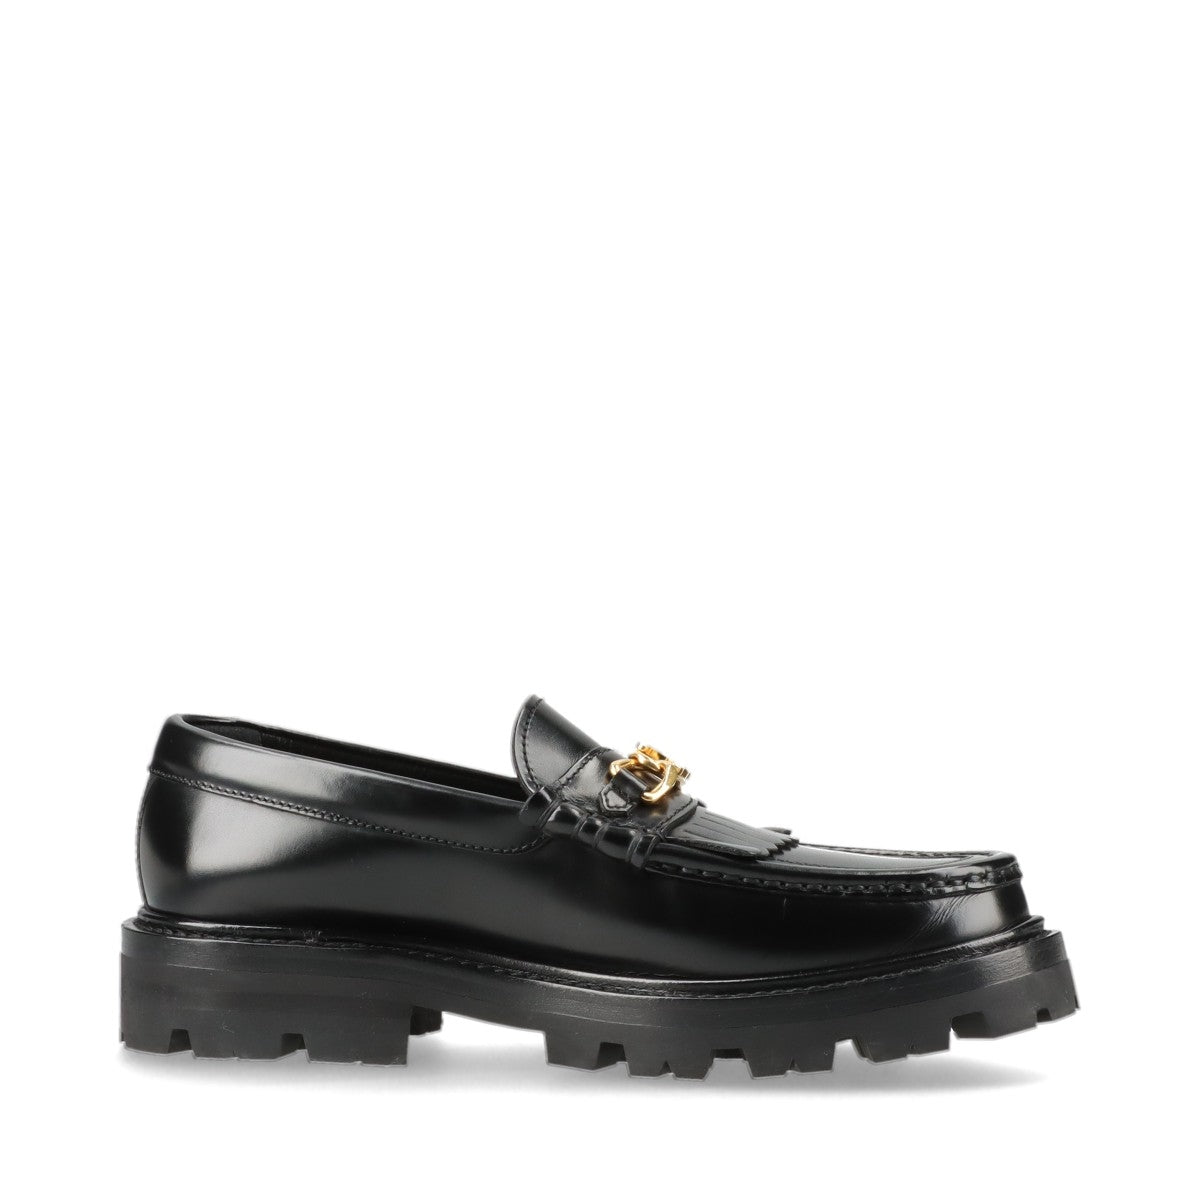 Celine Margaret Hedi Period Leather Loafer 36 Ladies' Black MG1211 Triomphe chain Fringe Box Included